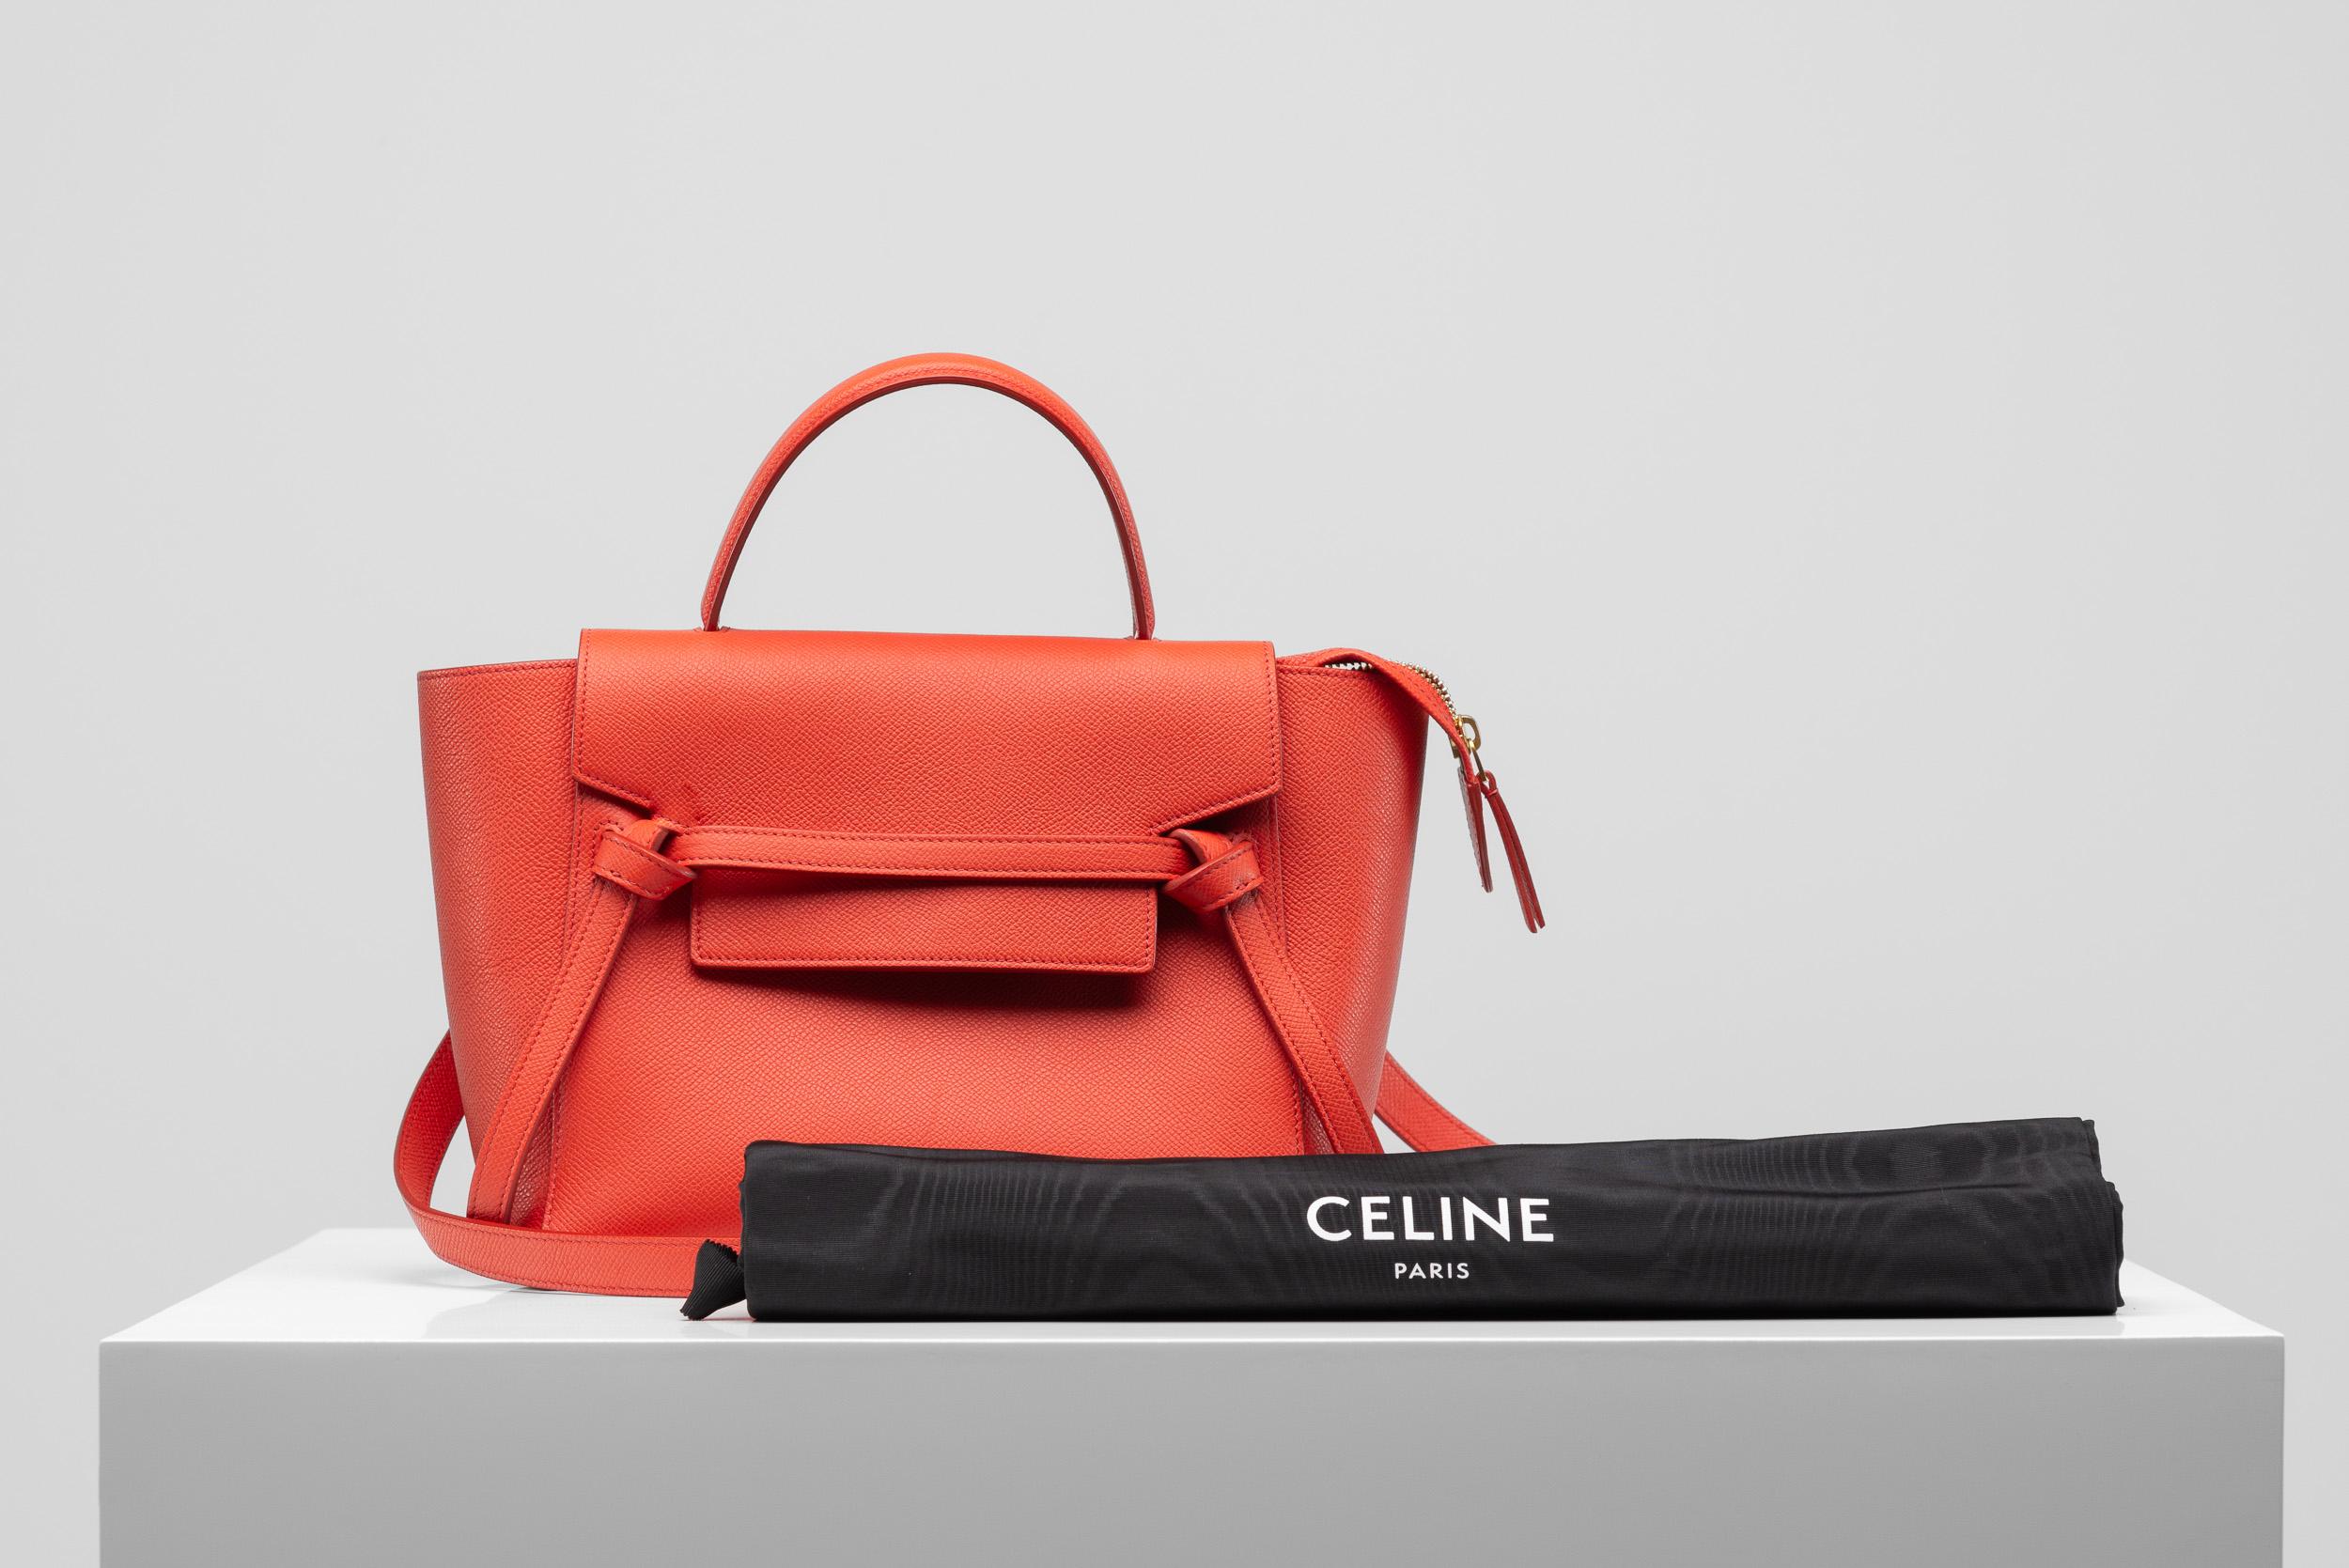 From the collection of SAVINETI we offer this Celine Belt Bag:
-    Brand: Celine
-    Model: Belt Bag Light Red
-    Condition: Very Good
-    Year: 2022
-    Materials: Calfskin, Gold-color hardware
-    Extras: dustbag

Micro Belt Bag in grained